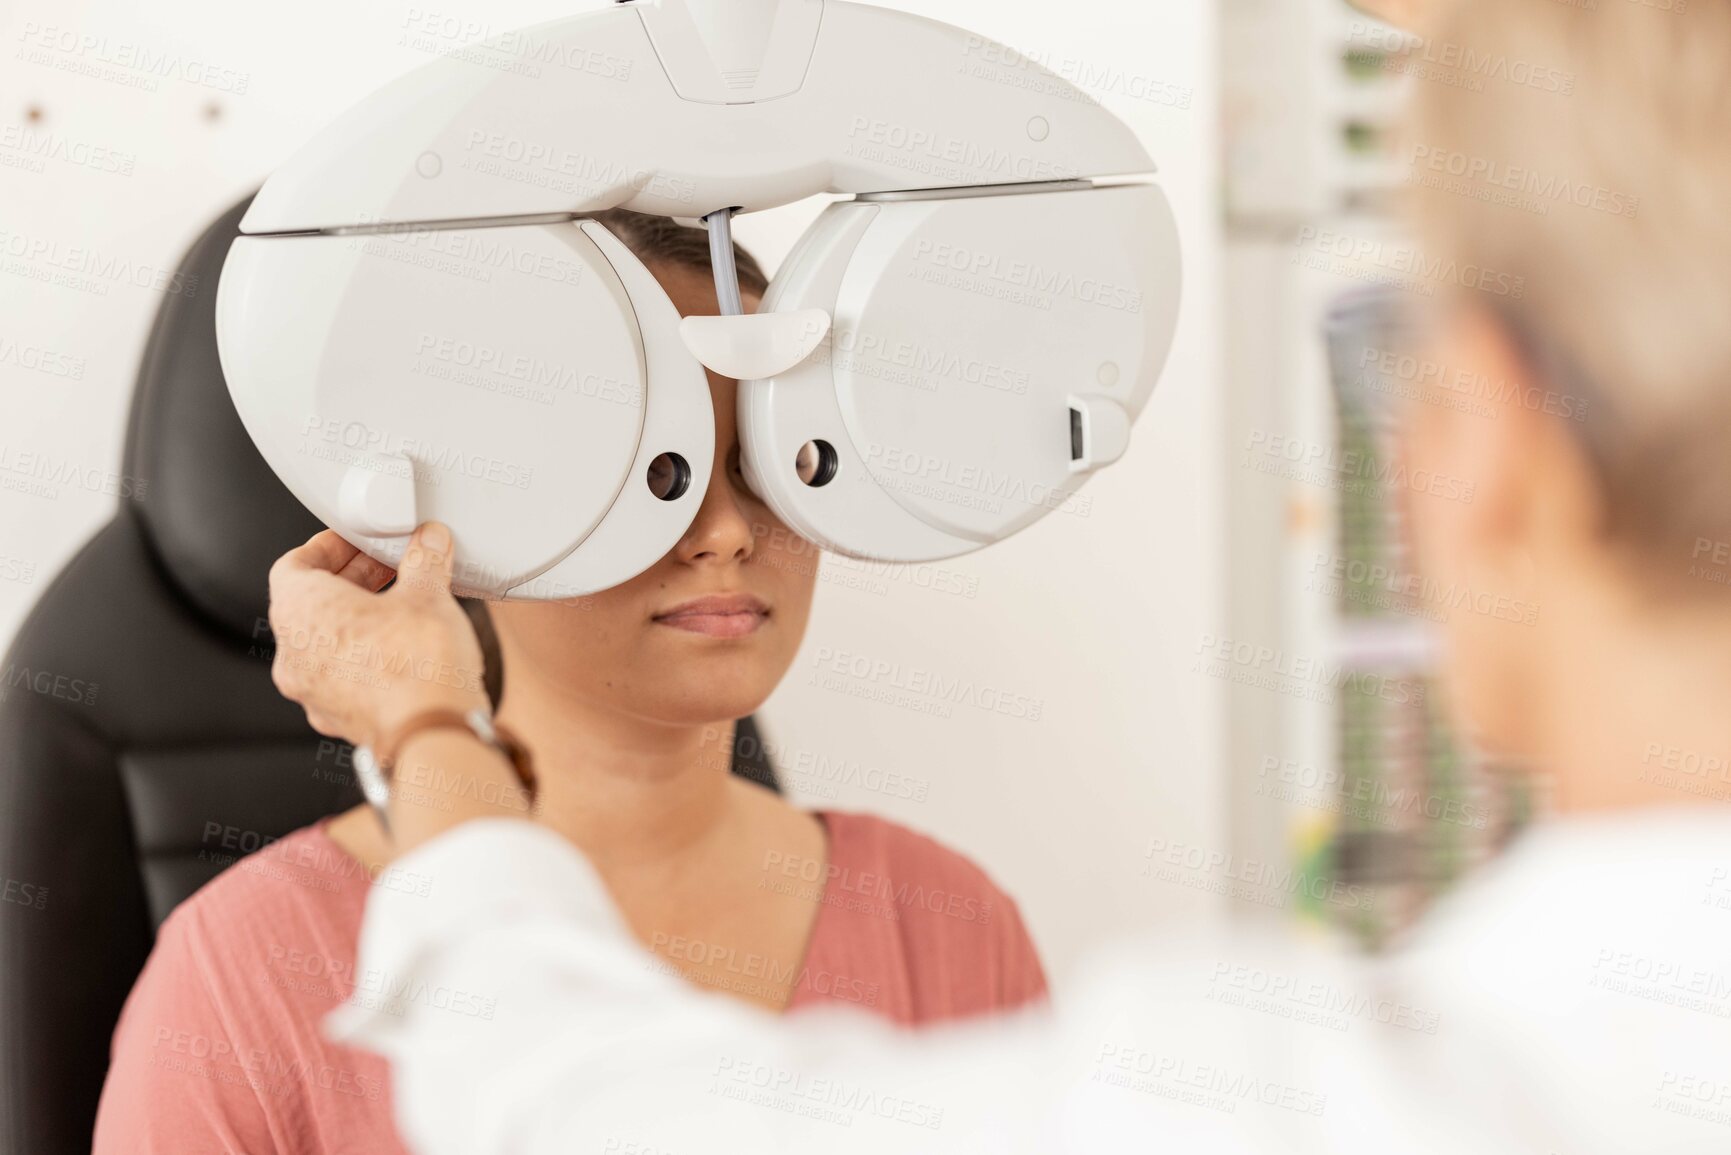 Buy stock photo Vision, consulting and lens exam of woman with expert eyecare professional in glaucoma testing clinic. Ophthalmologist, doctor and machine with girl patient at consultation appointment.

